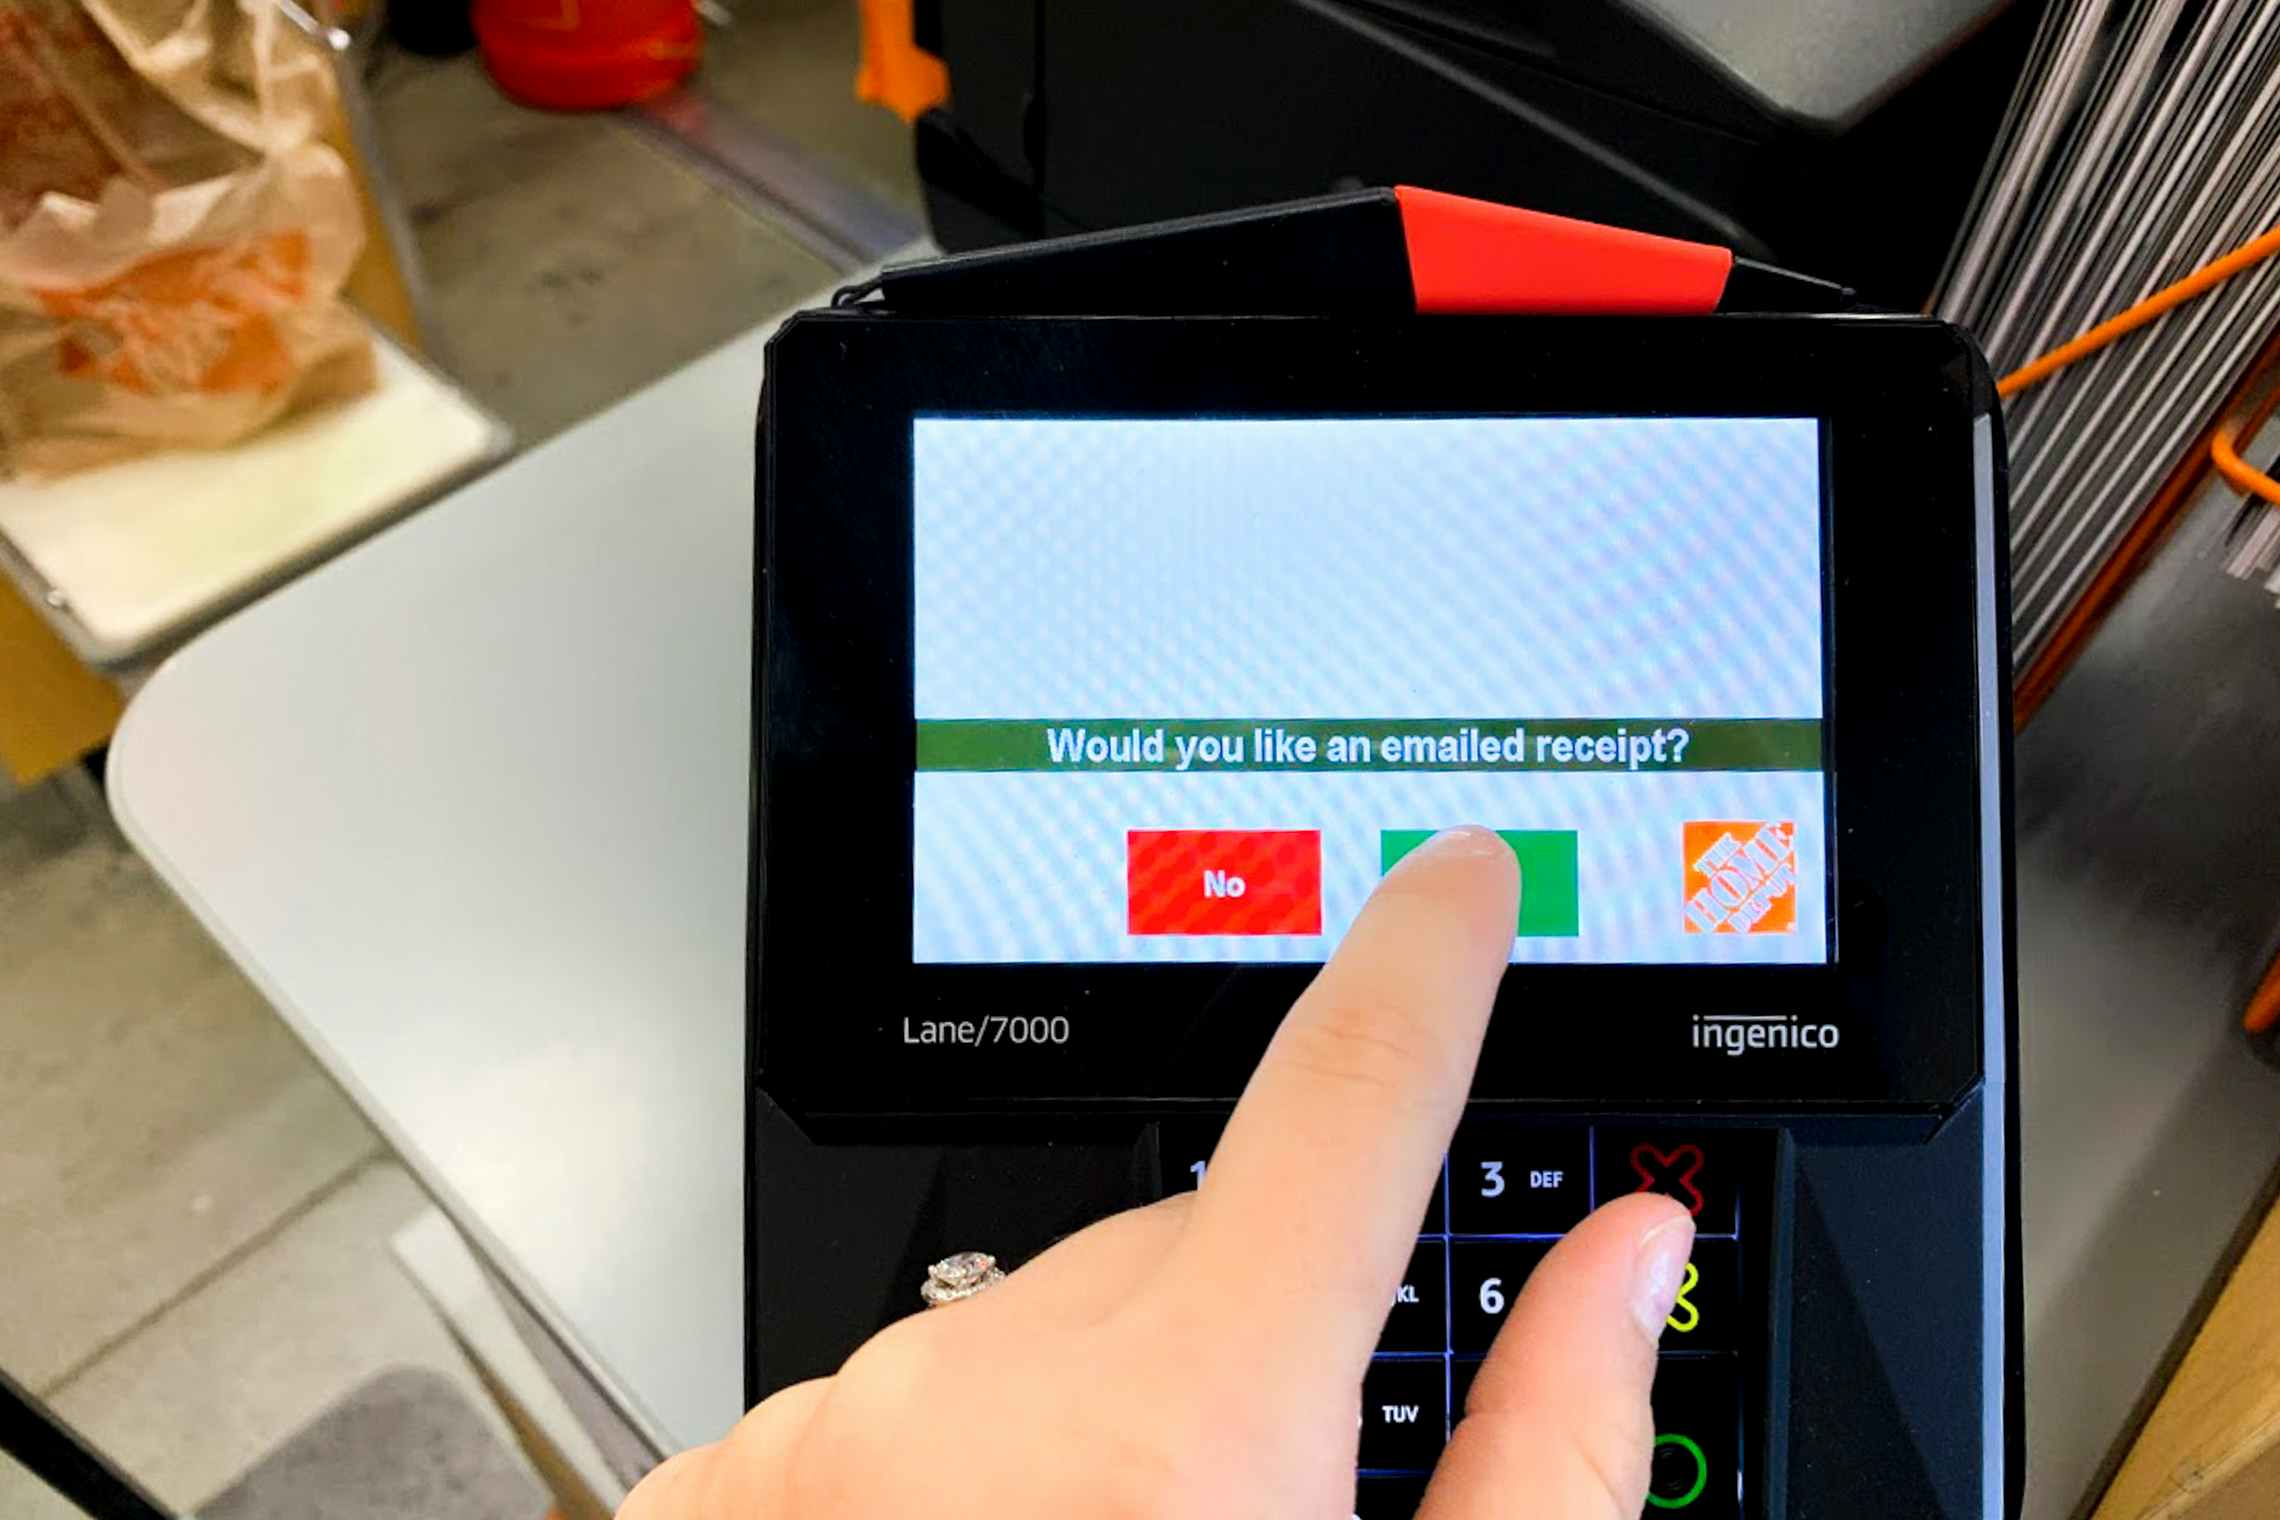 Someone checking yes to receiving an email receipt on a POS system at home depot